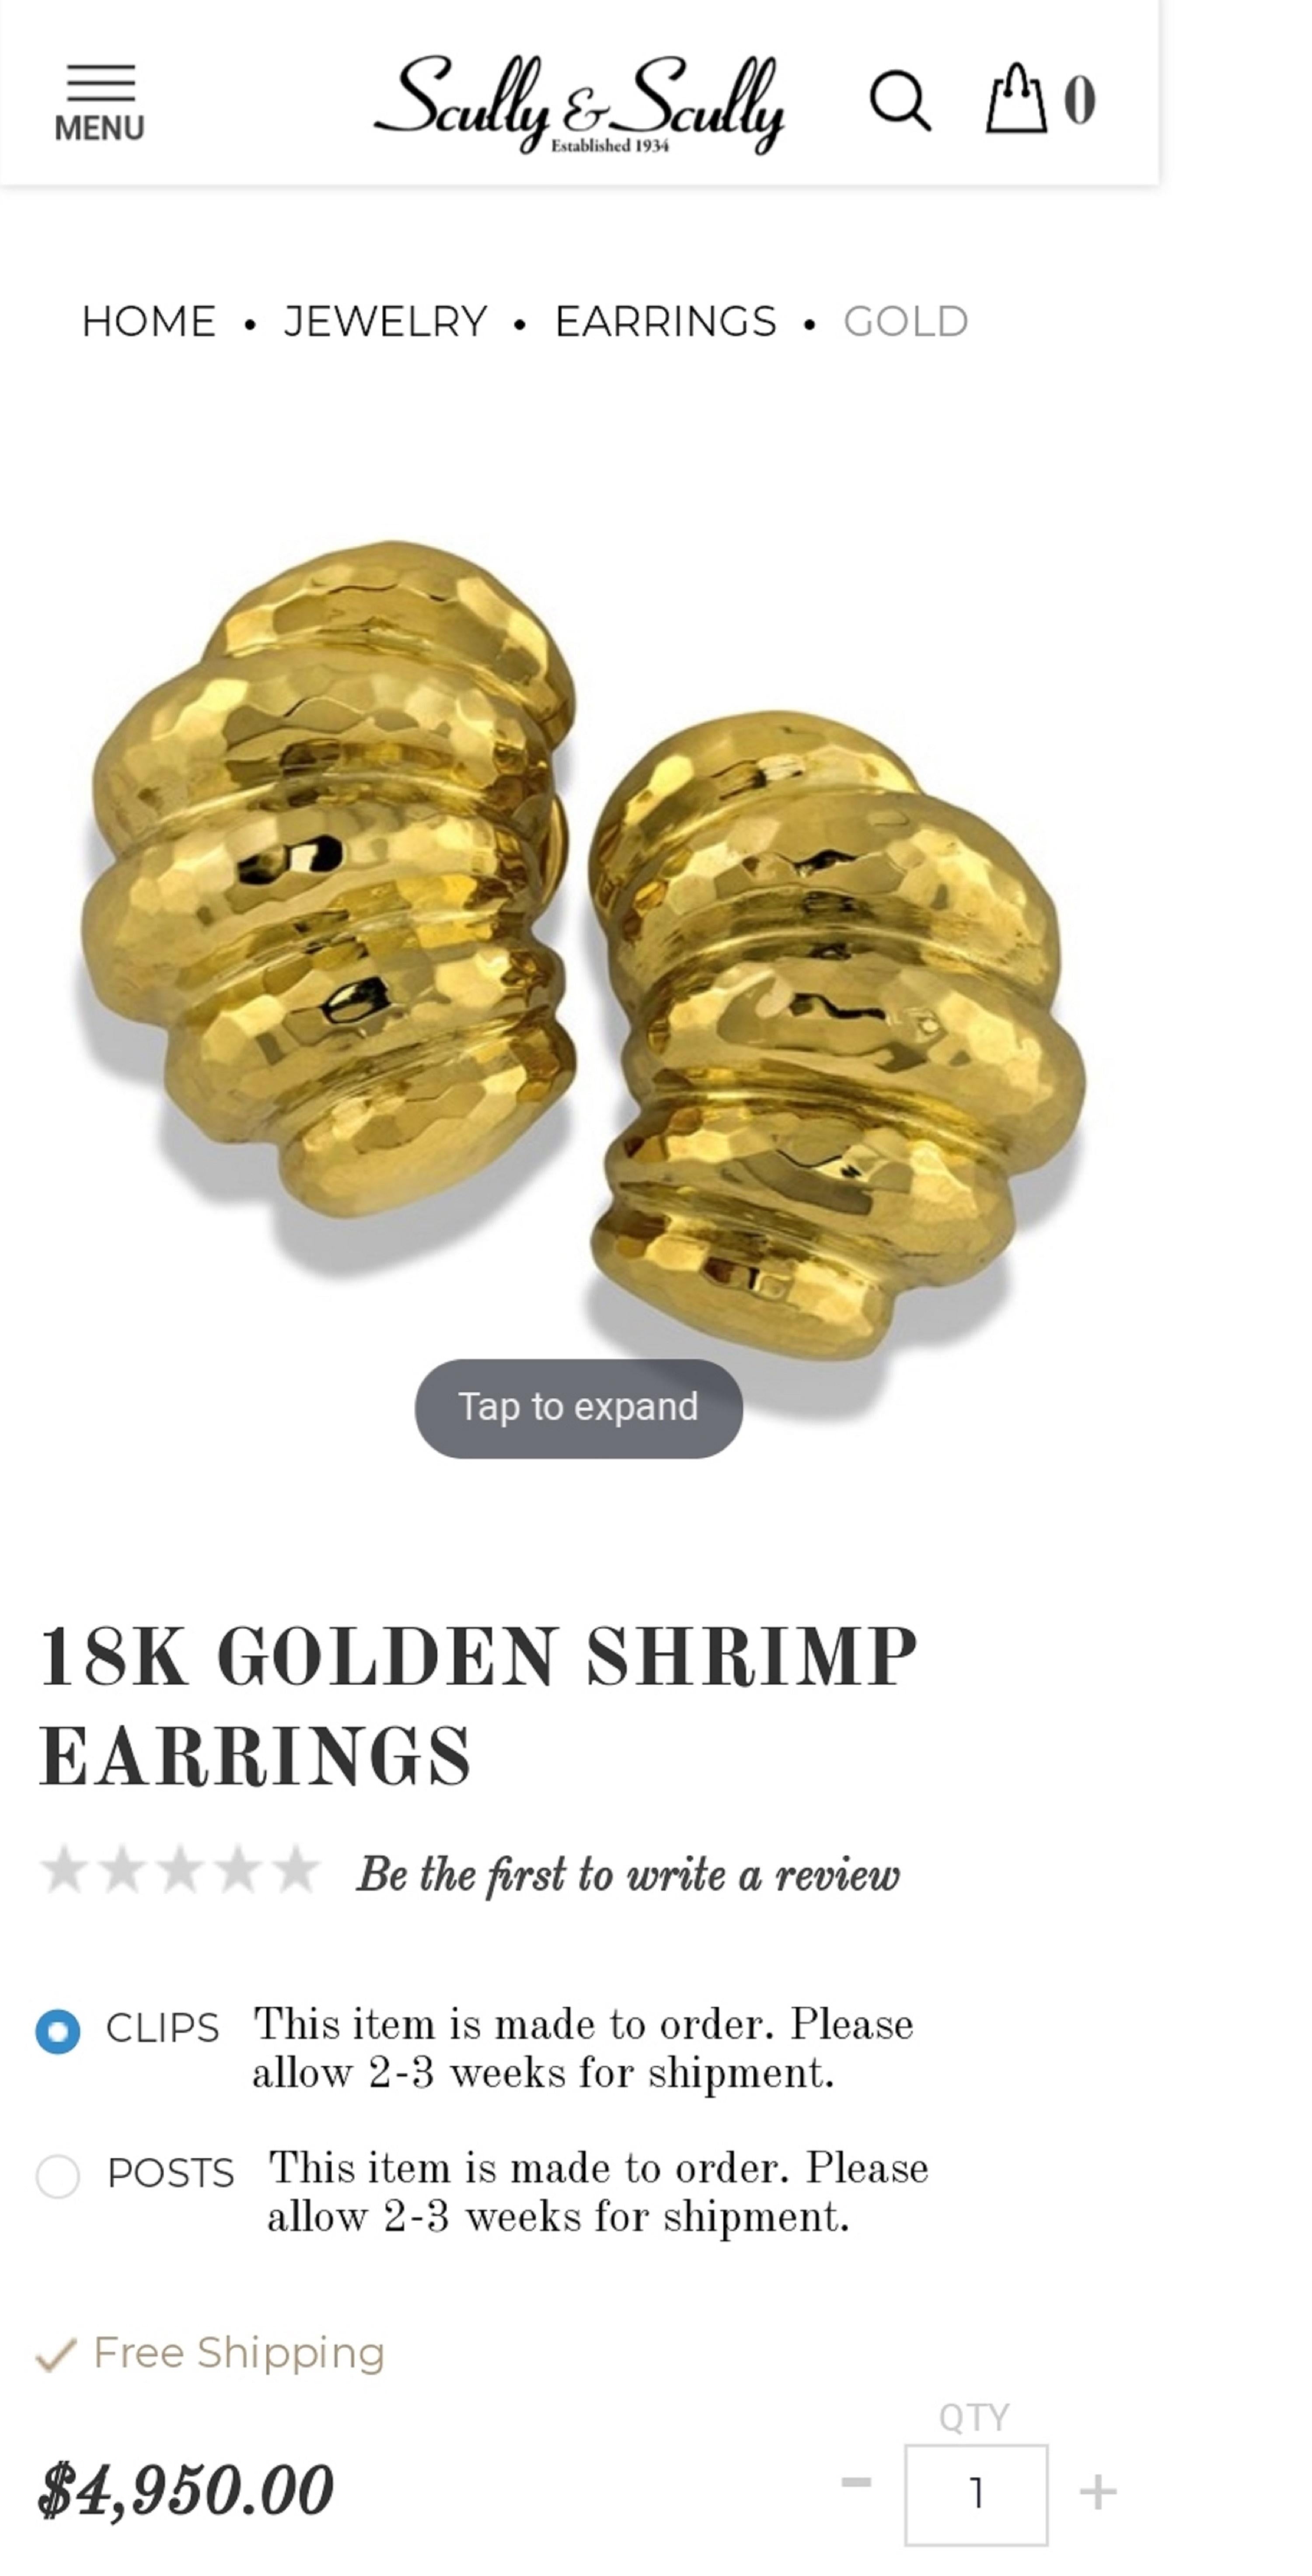 Scully & Scully 18 Karat Gold Earrings in a Crescent Shrimp Design 4